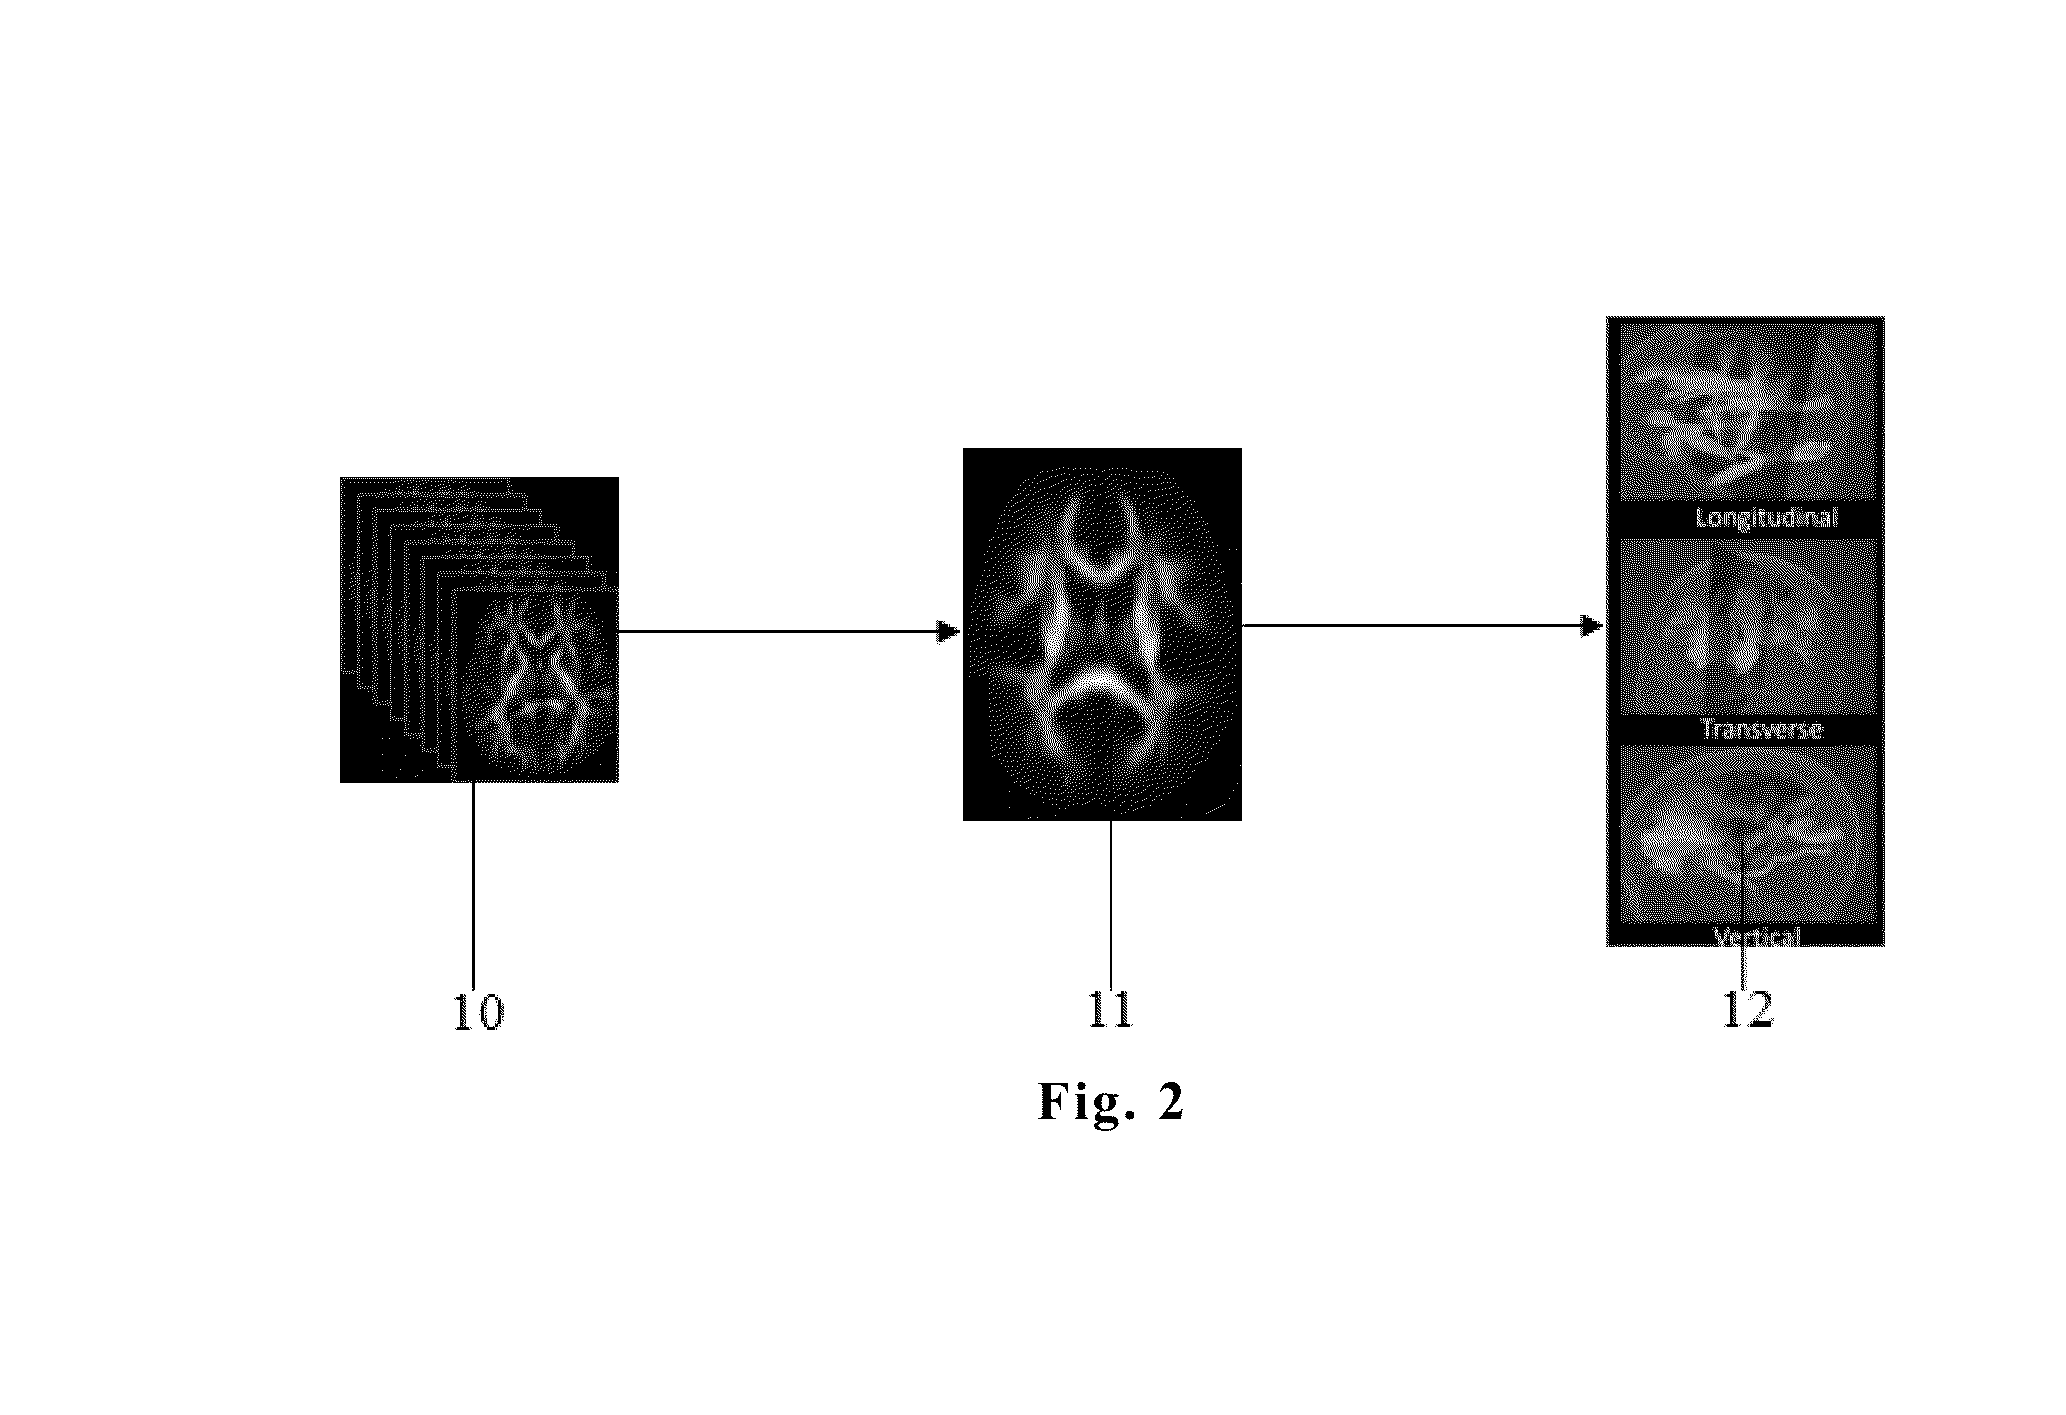 Method of Automatically Analyzing Brain Fiber Tracts Information